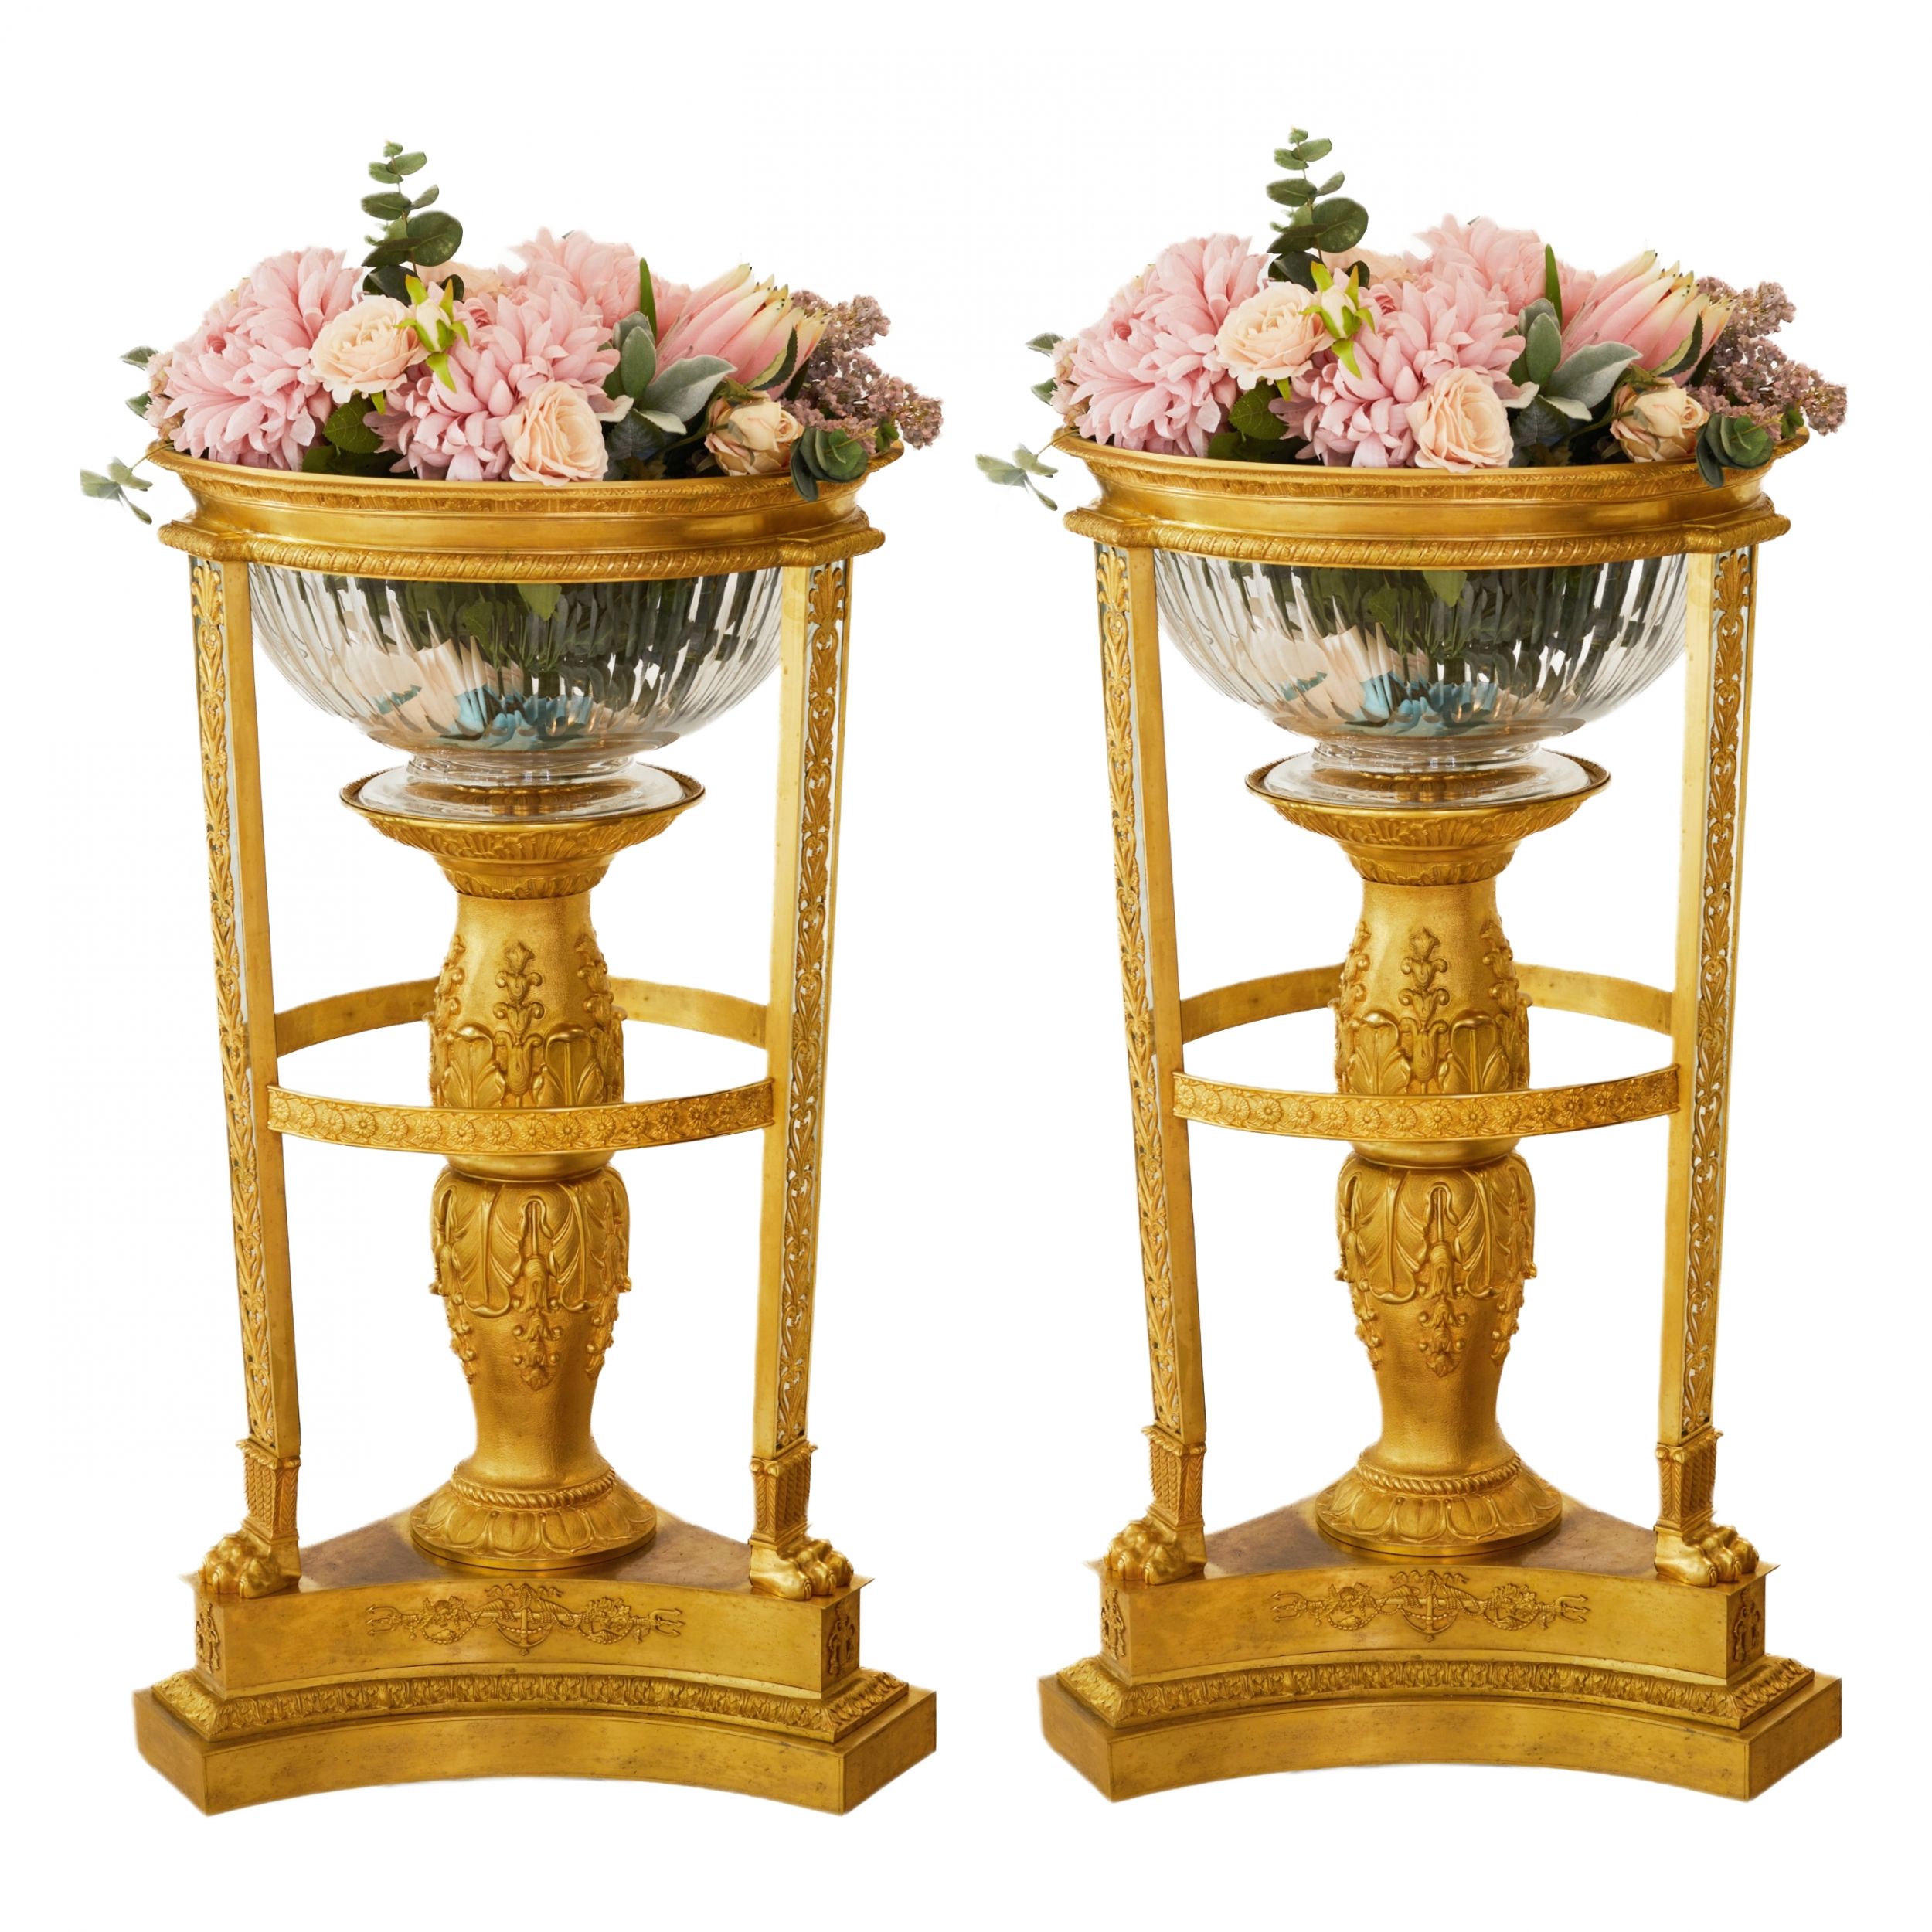 Pair-of-grandiose-decorative-Jardinières-in-the-style-of-Napoleon-III-France-The-turn-of-the-19th-20th-century